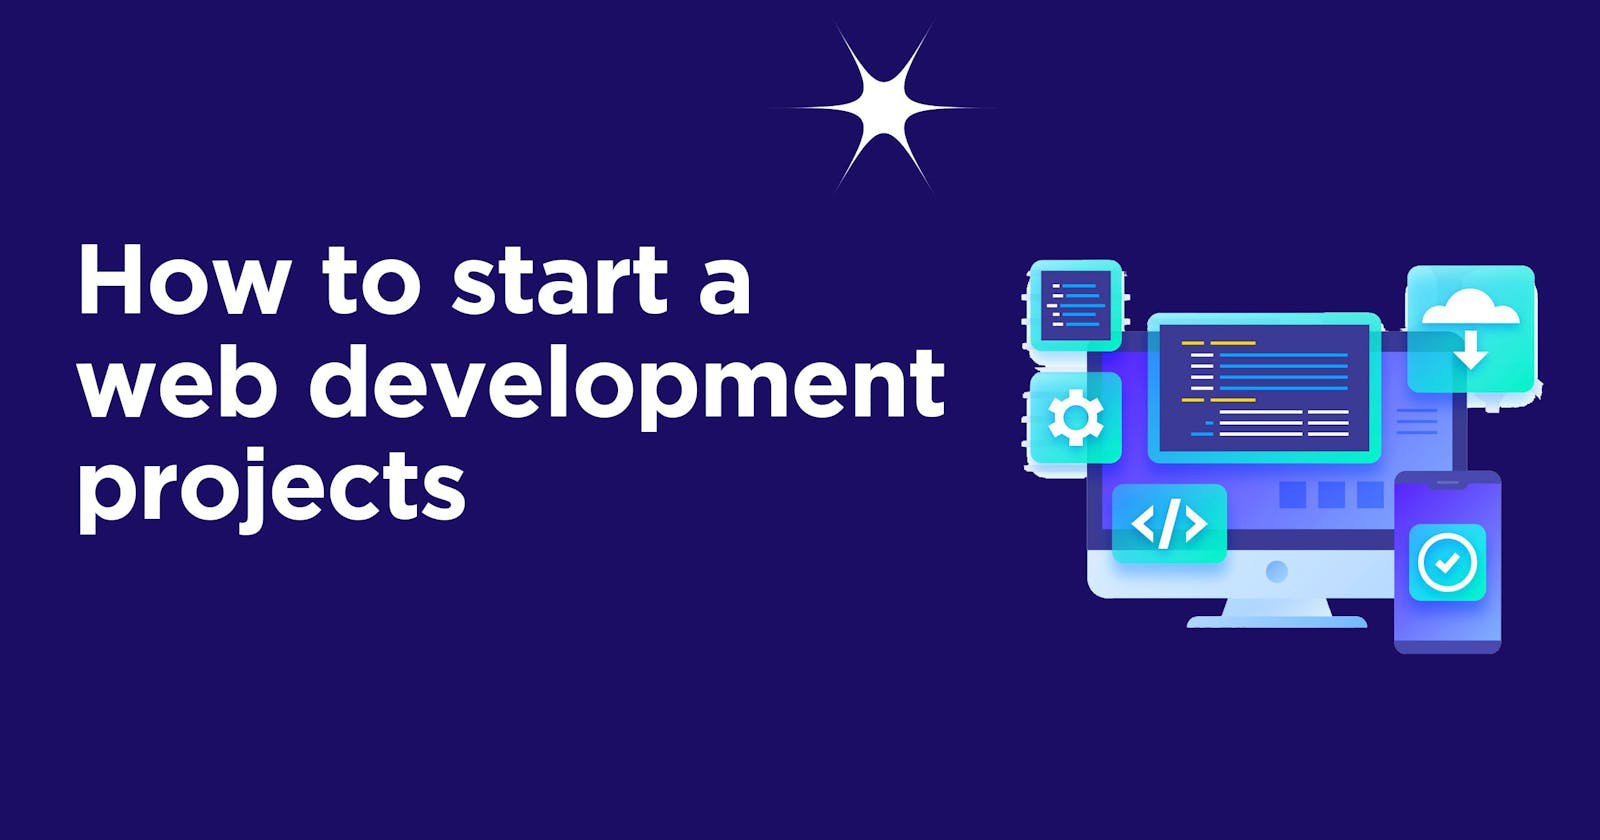 How to start a web development project? Step by step guideline